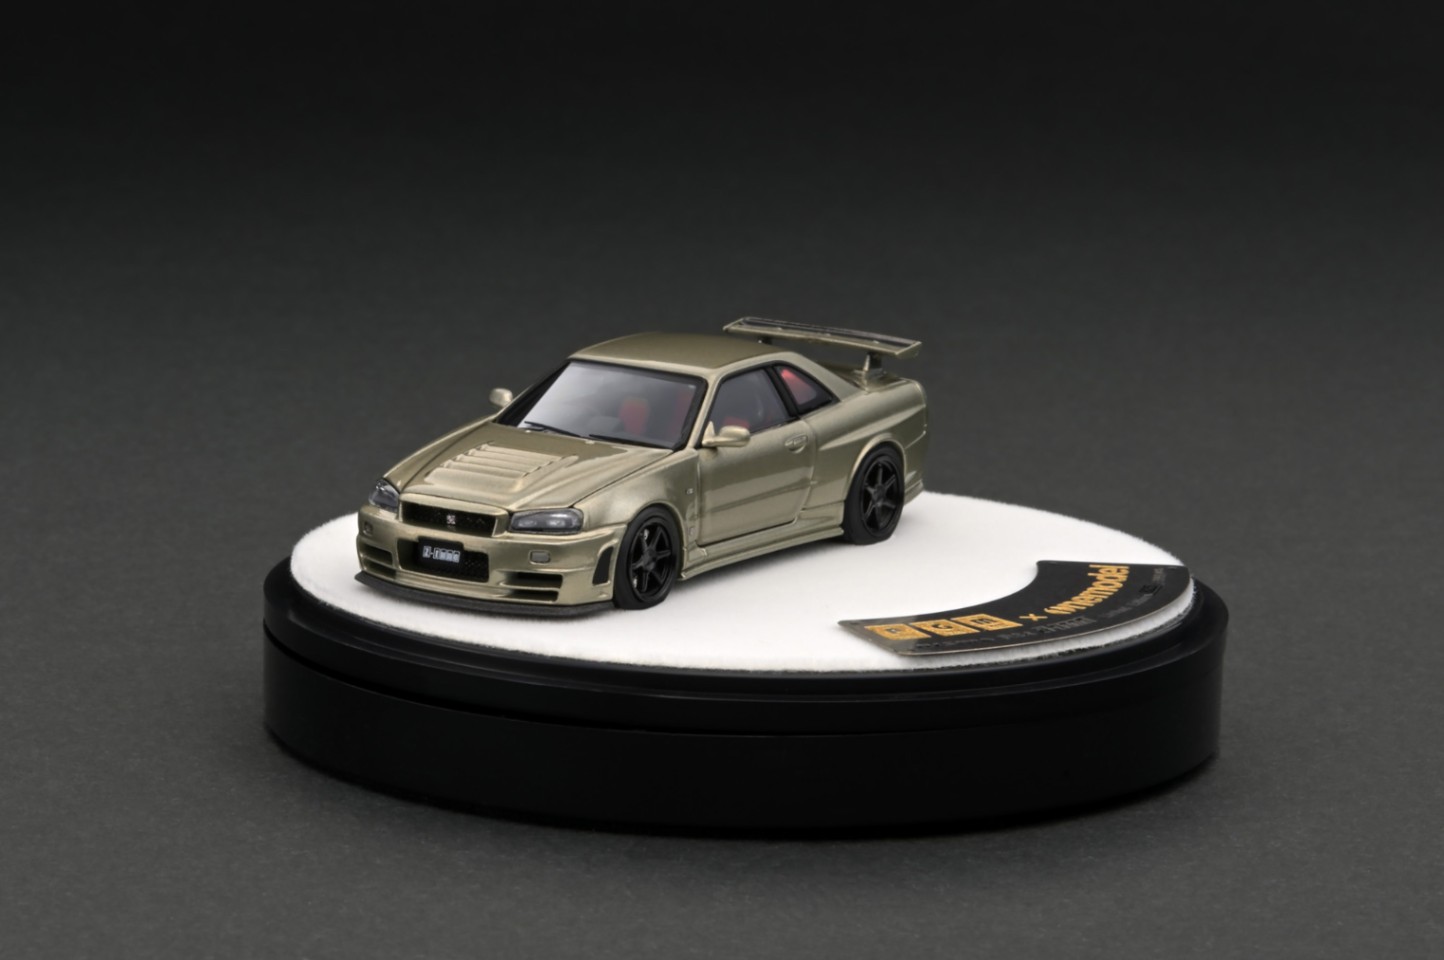 PGM-641001-2 PGM 1/64 Nismo R34 GT-R Z-tune Jade Green With Engine Rotating display